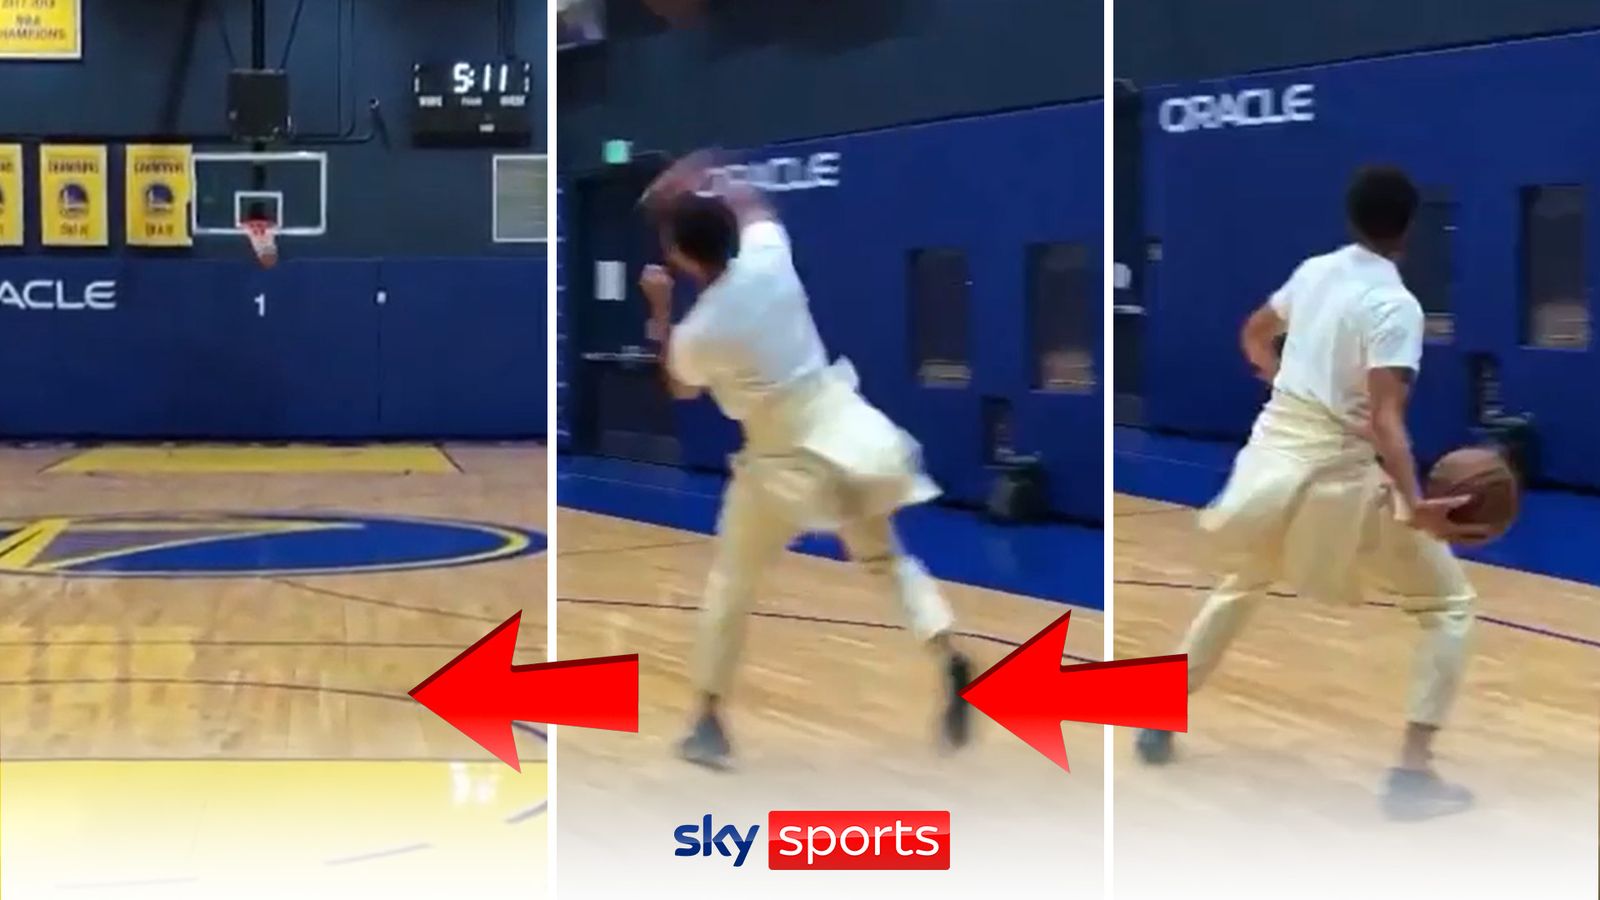 Real or fake? Steph Curry sinks five full court shots in a row